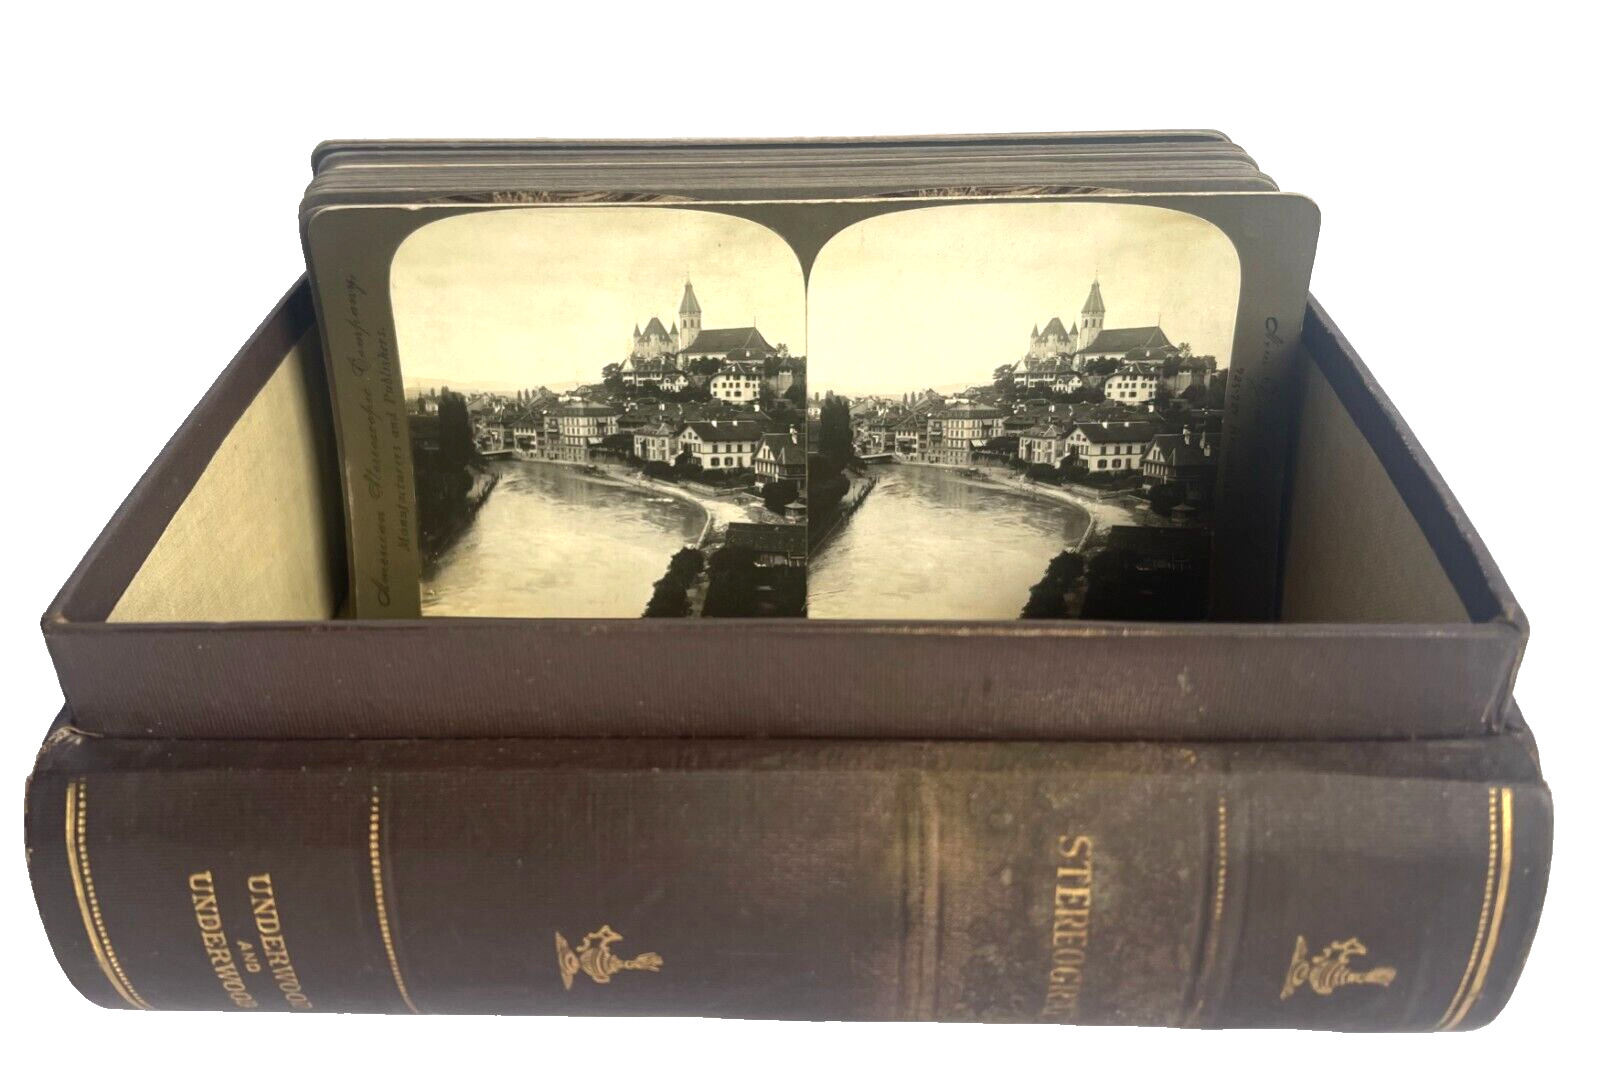 ANTIQUE UNDERWOOD STORAGE BOX & 23 STEREOSCOPIC PHOTOGRAPHS 3-D STEREOVIEW CARDS